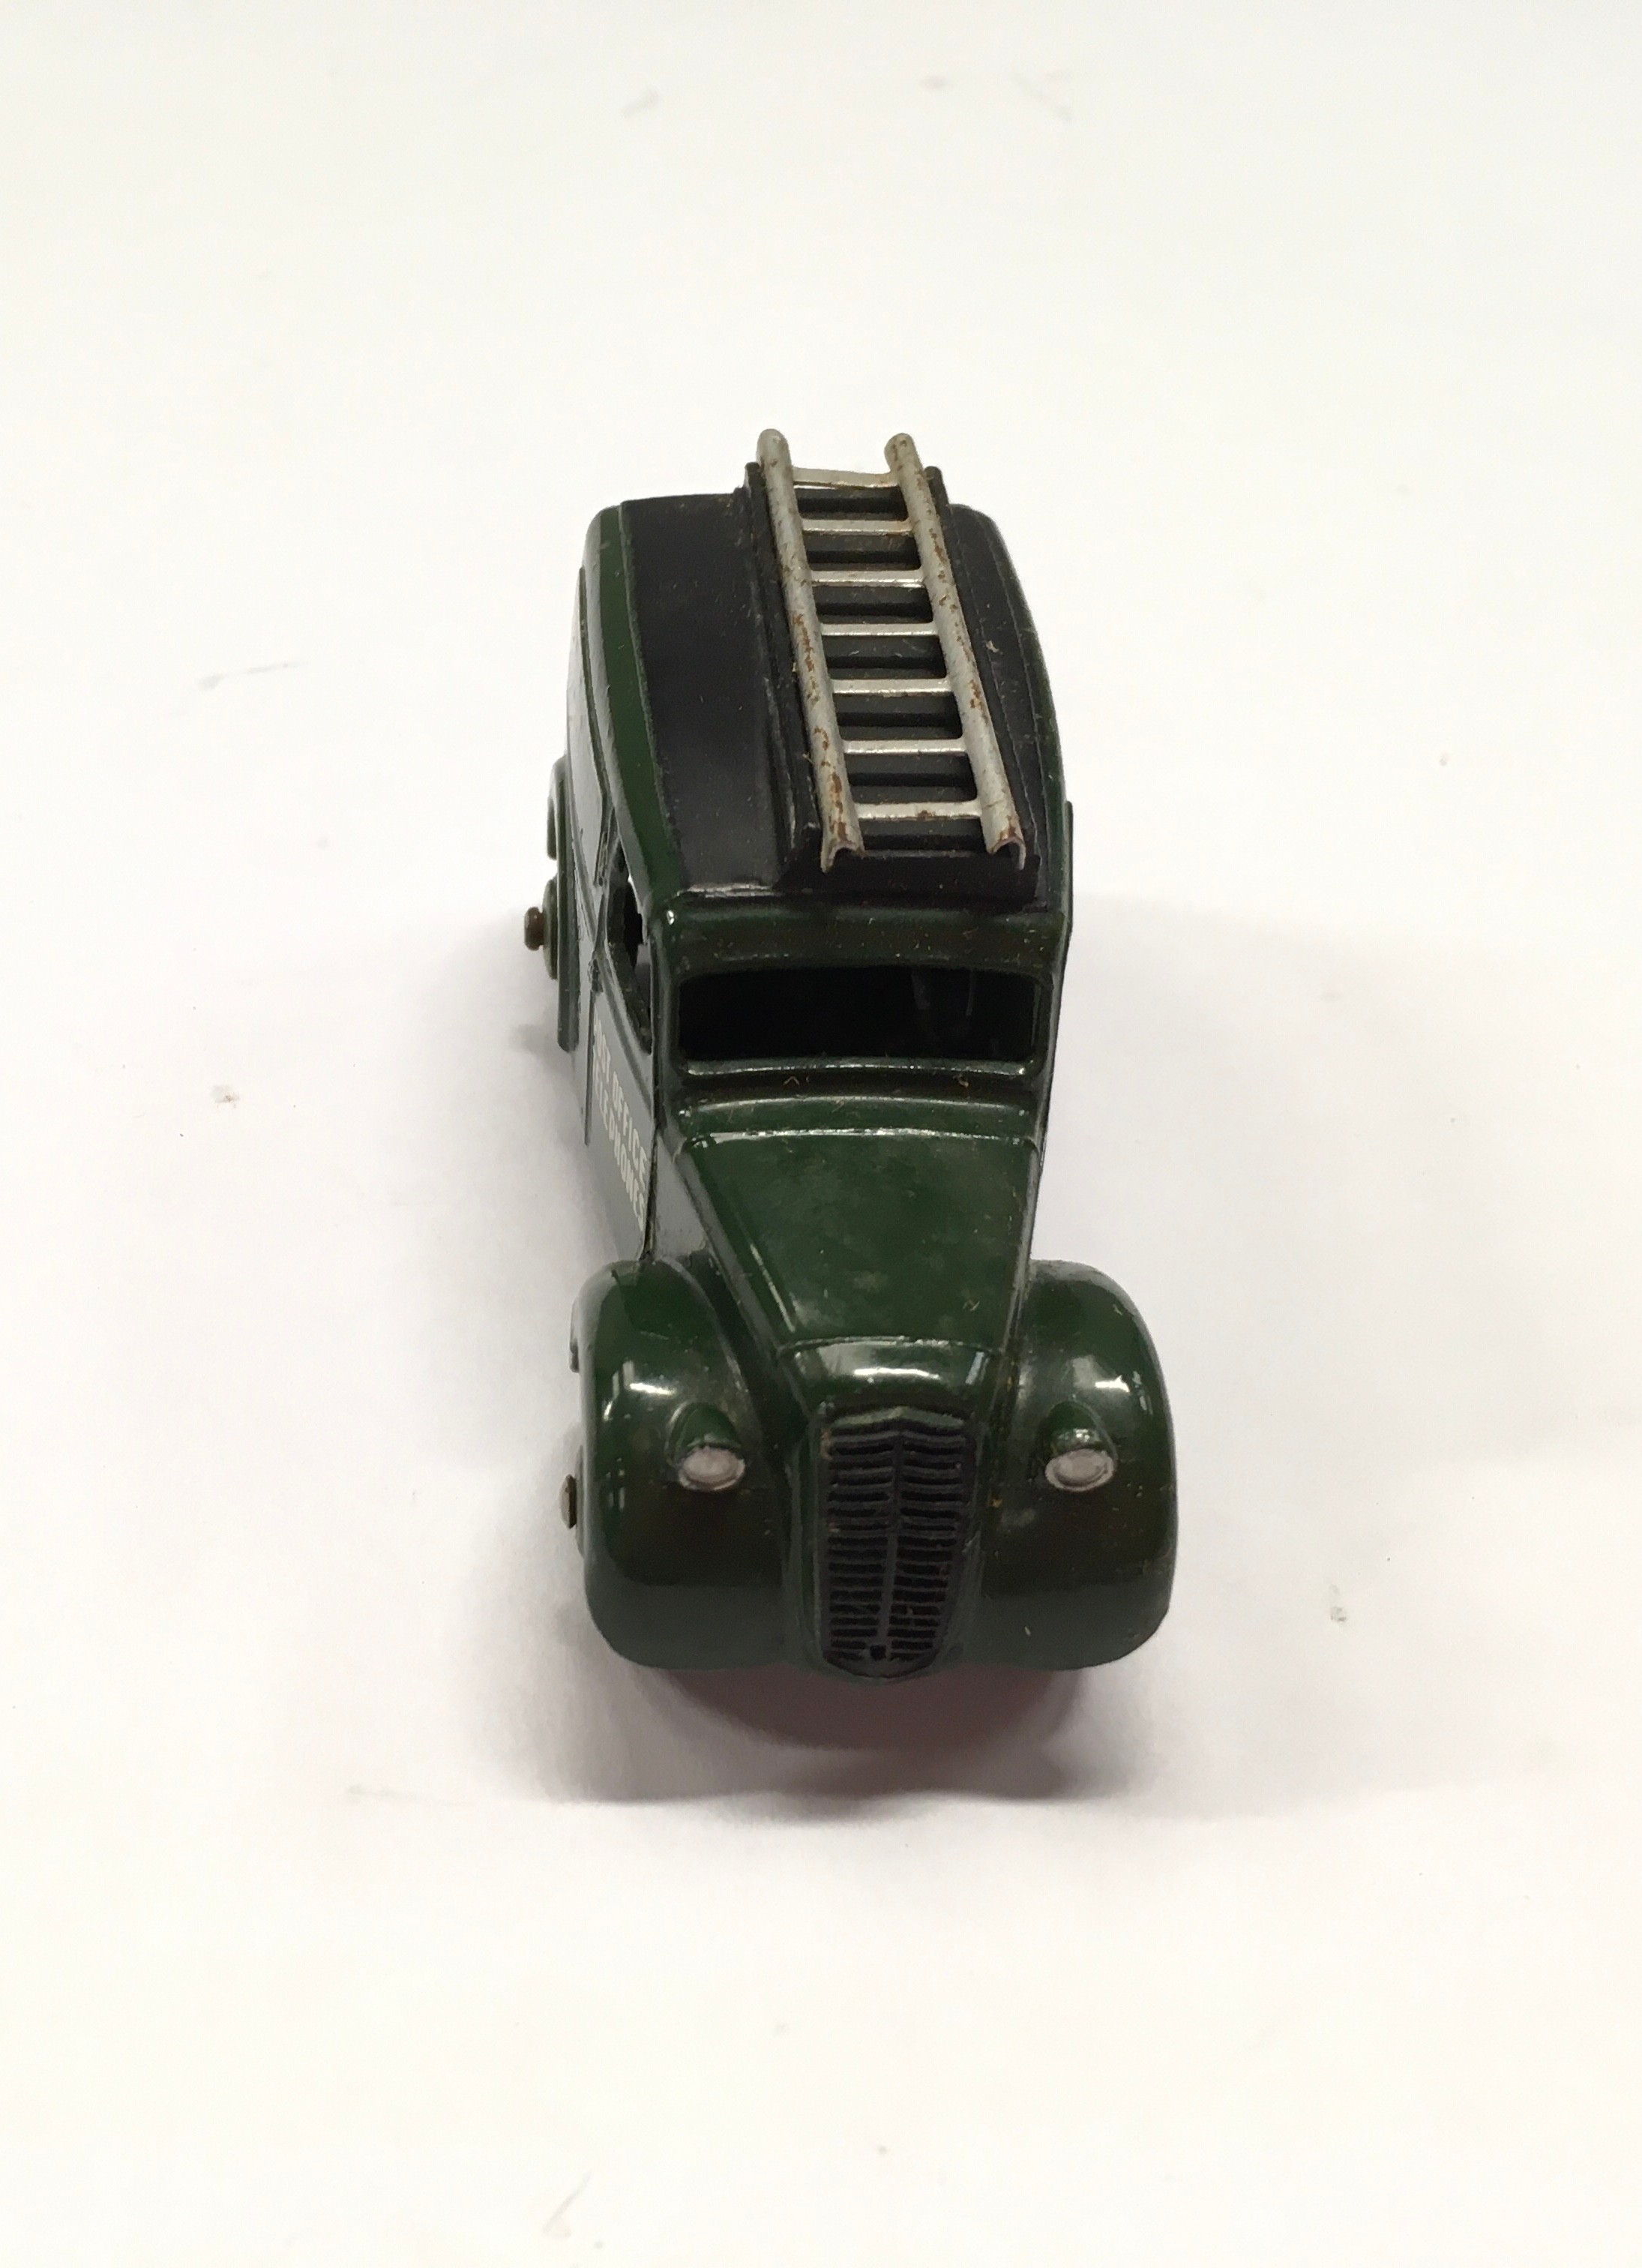 Dinky 261 Morris Telephone Service Van "Post Office Telephones" - green including ridged hubs with - Image 3 of 3